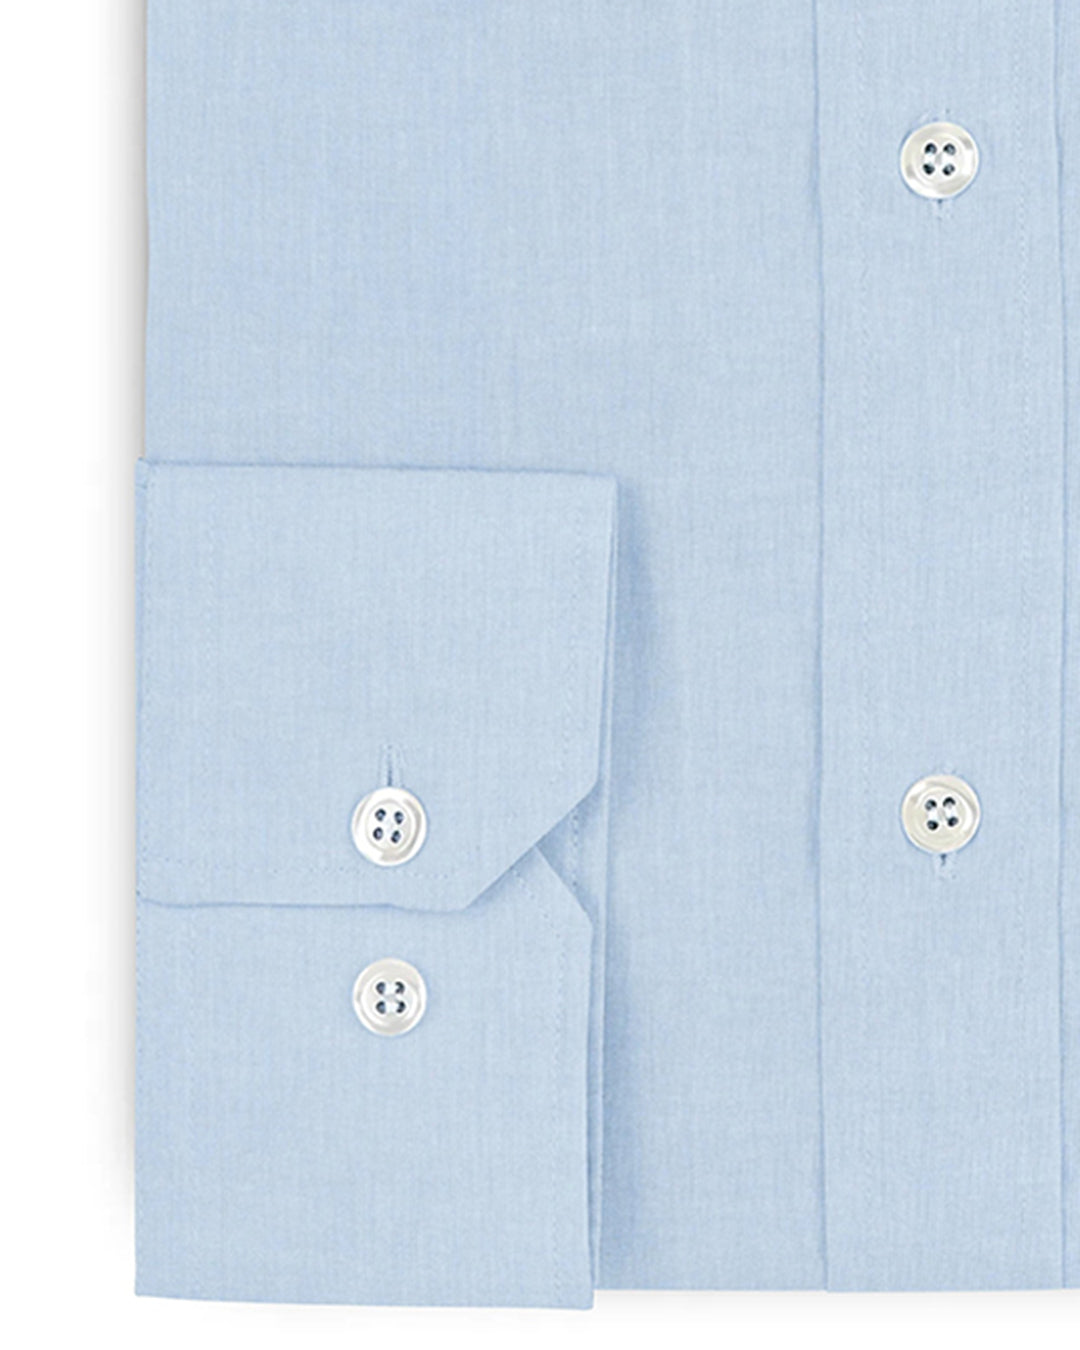 Ice Blue Pinpoint Oxford Shirt